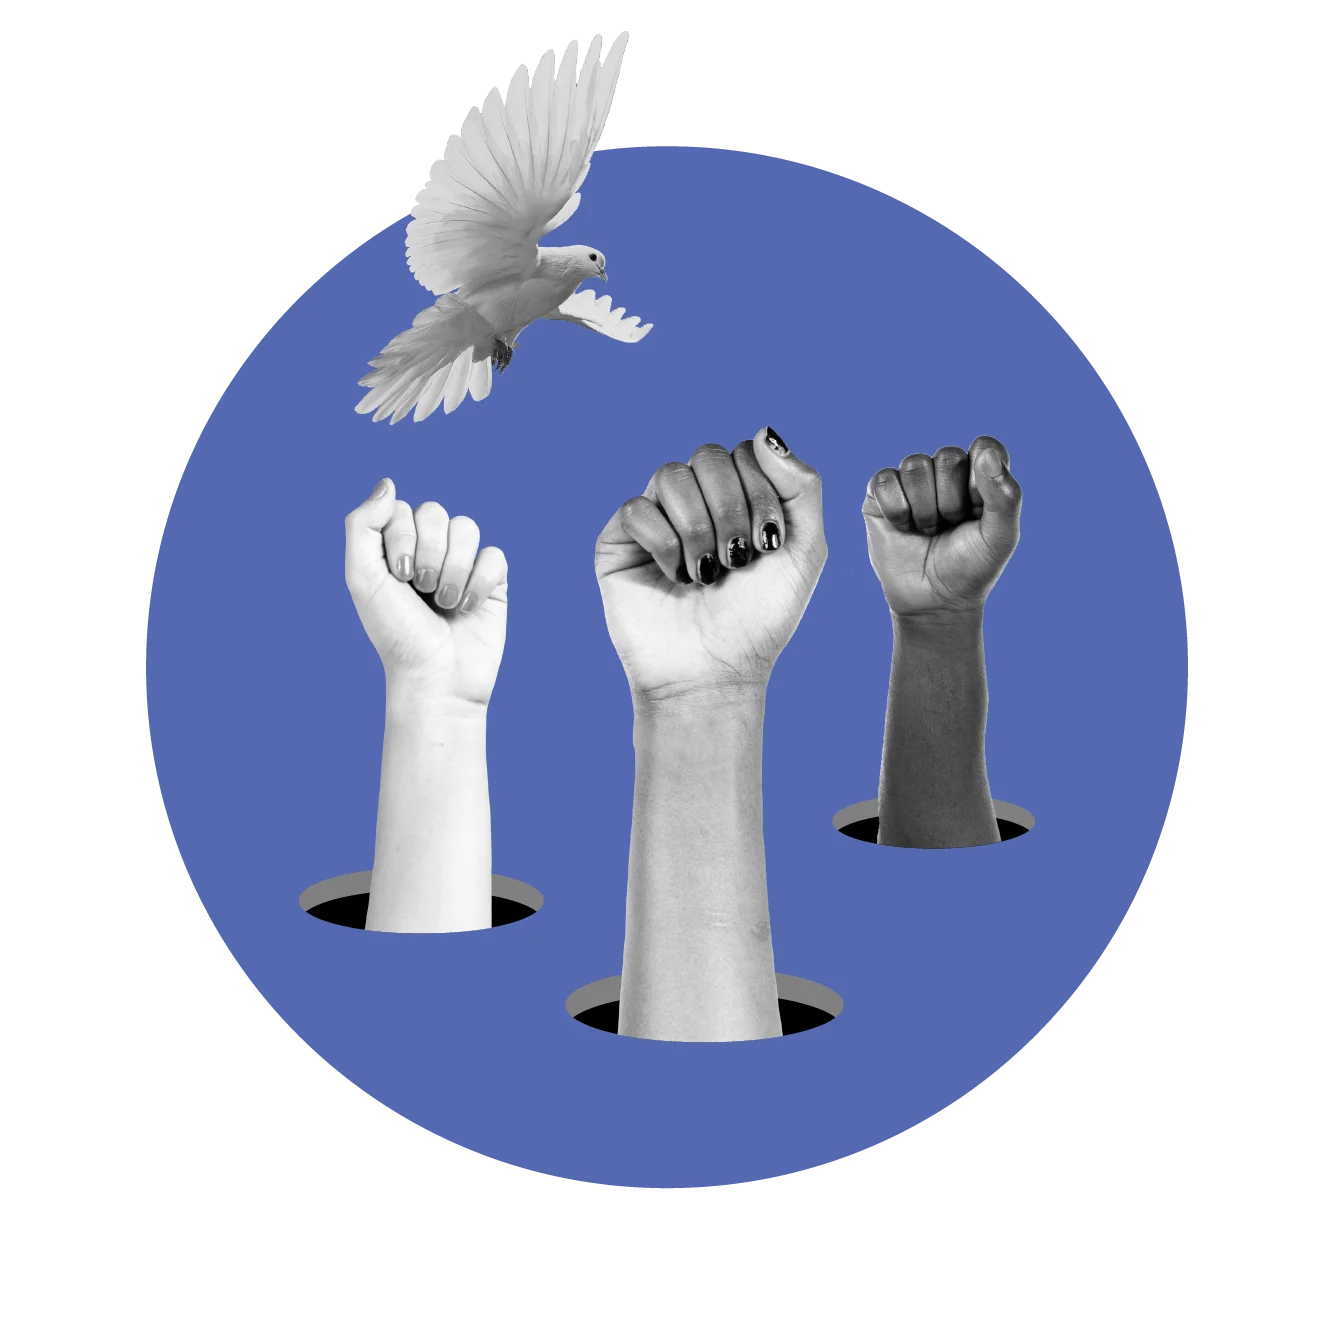 Blue circle with three fists to the air, white dove in air